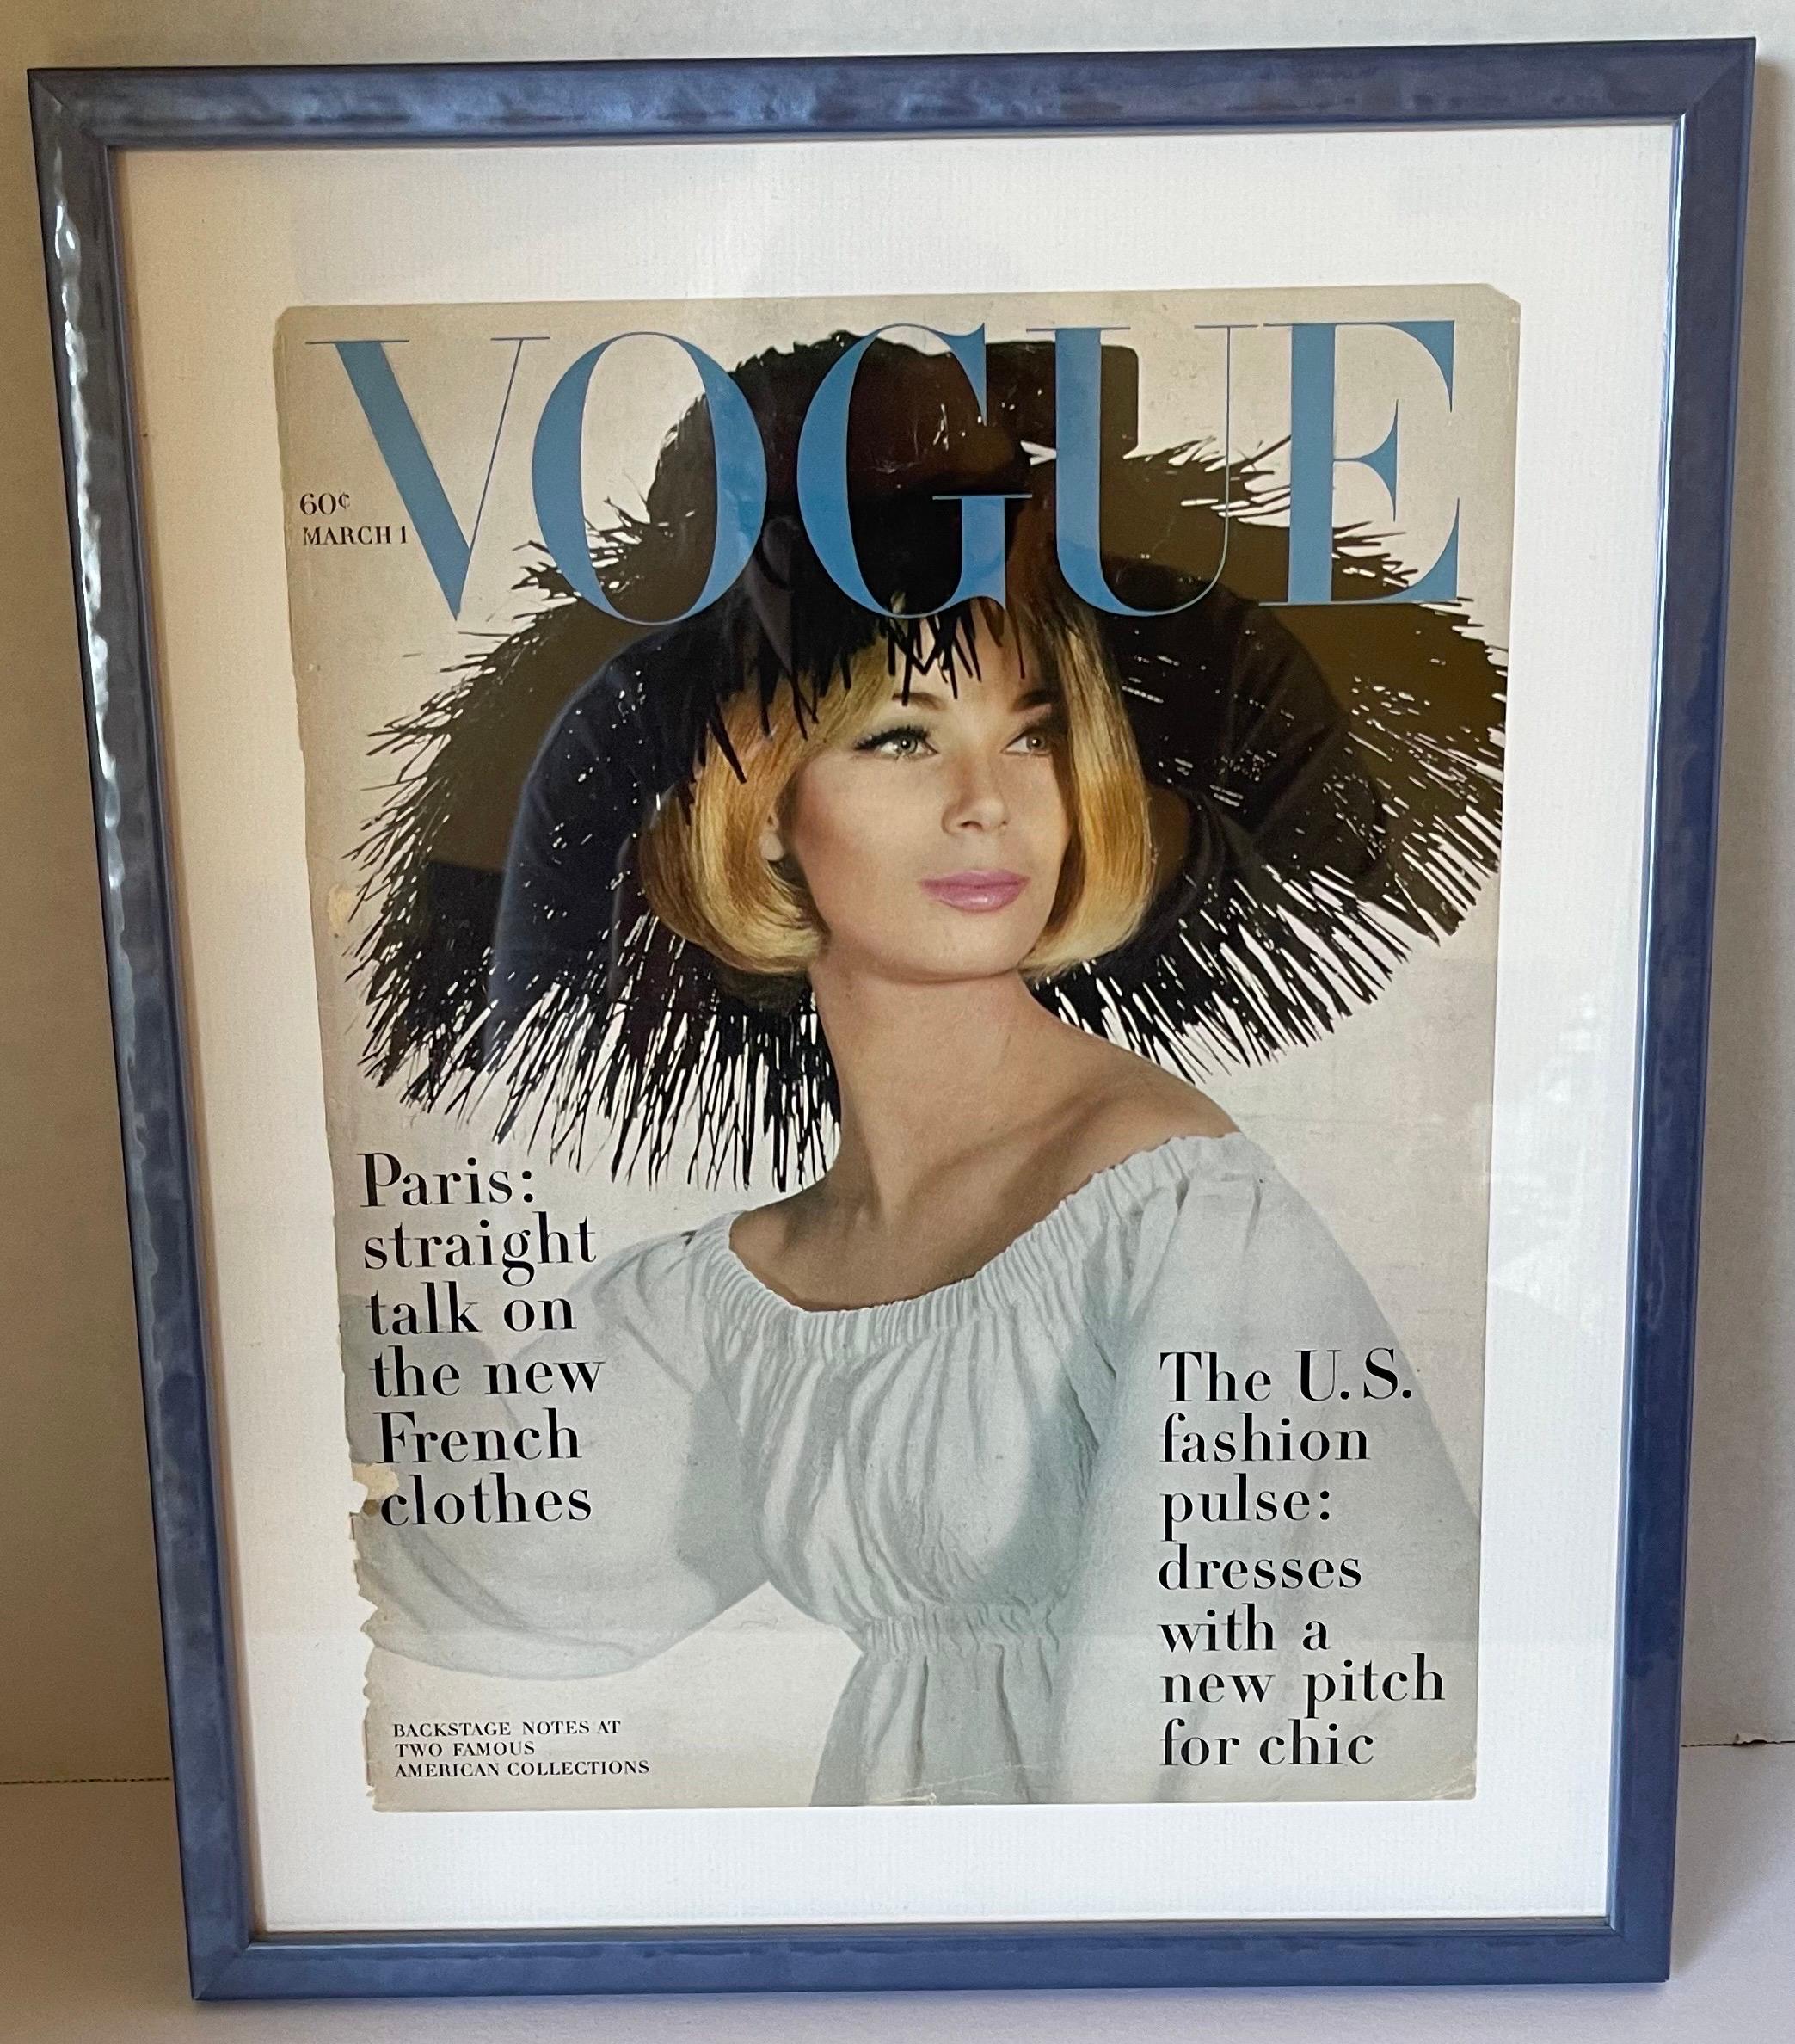 Vogue March 1963 framed original cover. Featuring cover model Burke Amey and a Cartwheel Hat by Halston by Irving Penn. newly framed in blue glossy wood frame. 